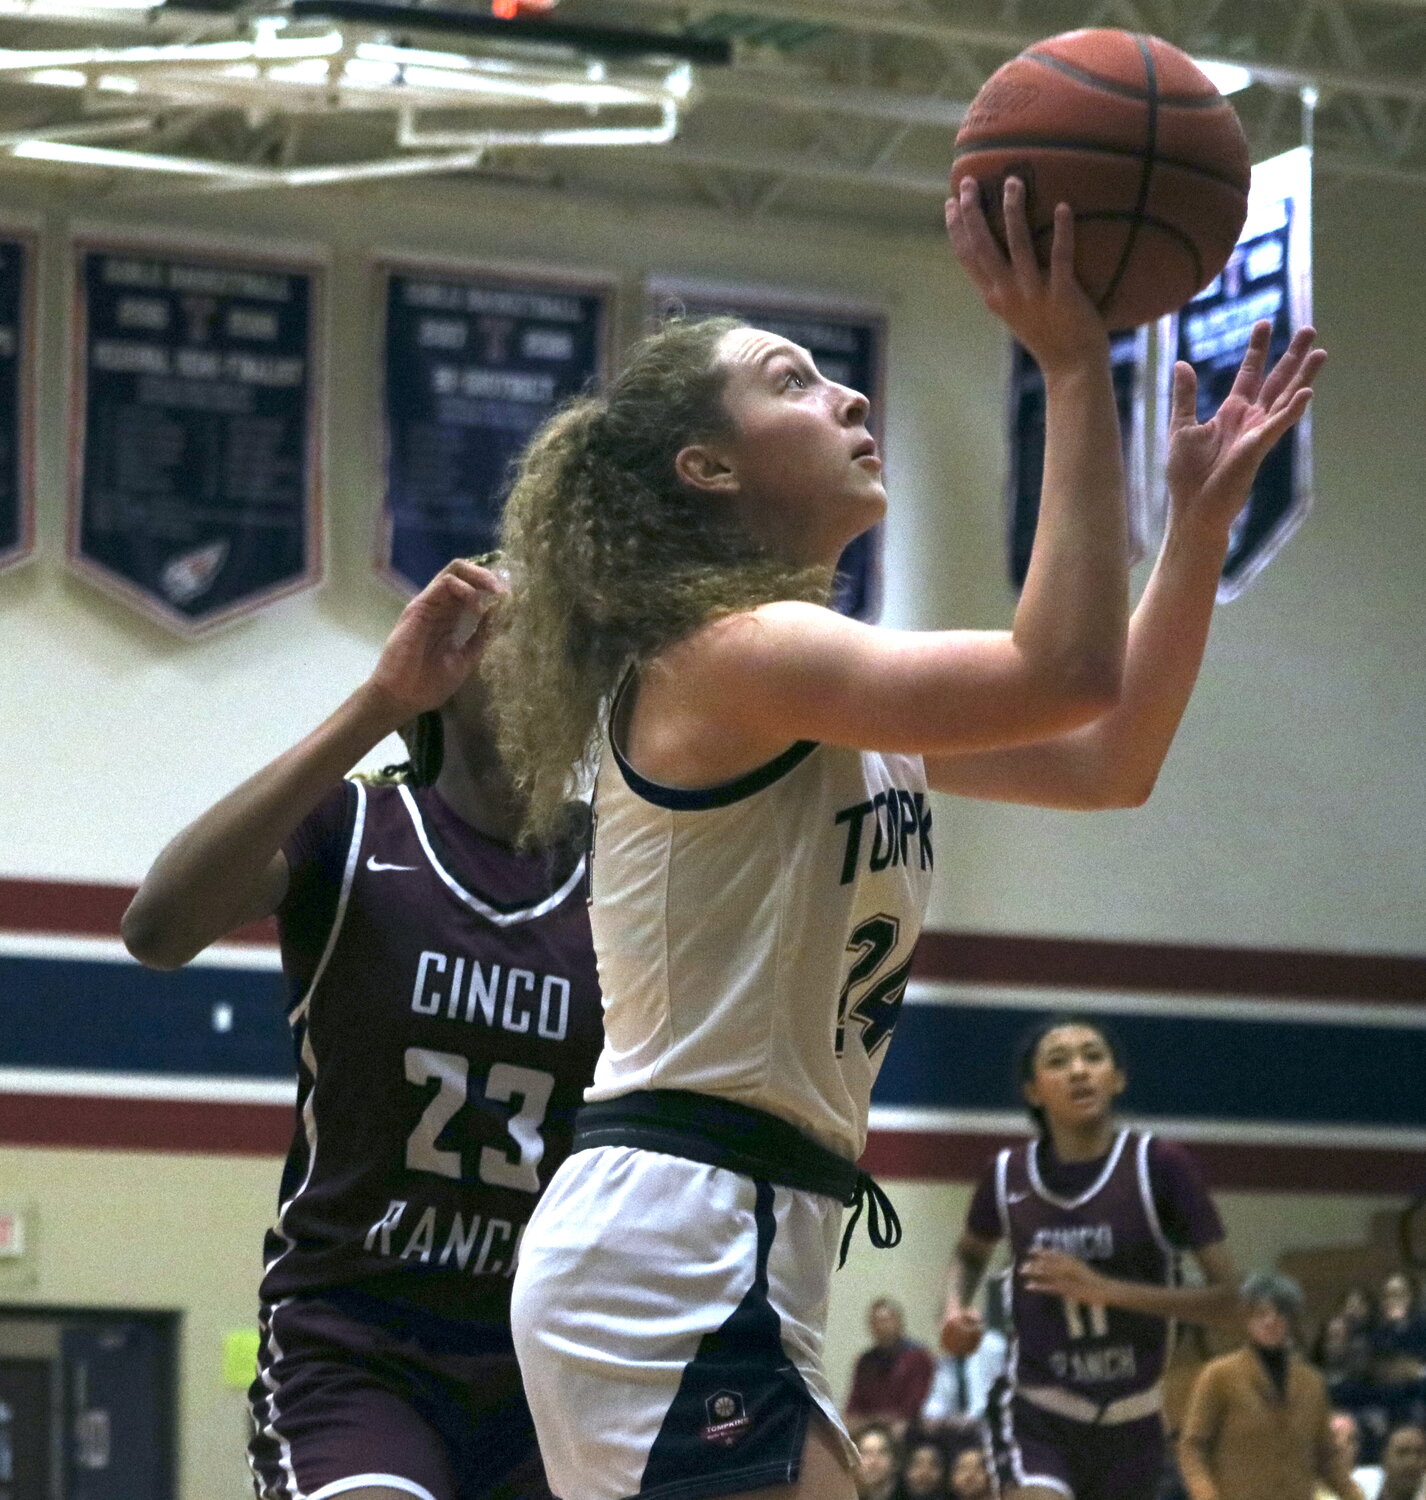 Gabby Panter shoots a layup during Tuesday's game between Tompkins and Cinco Ranch at the Tompkins gym.